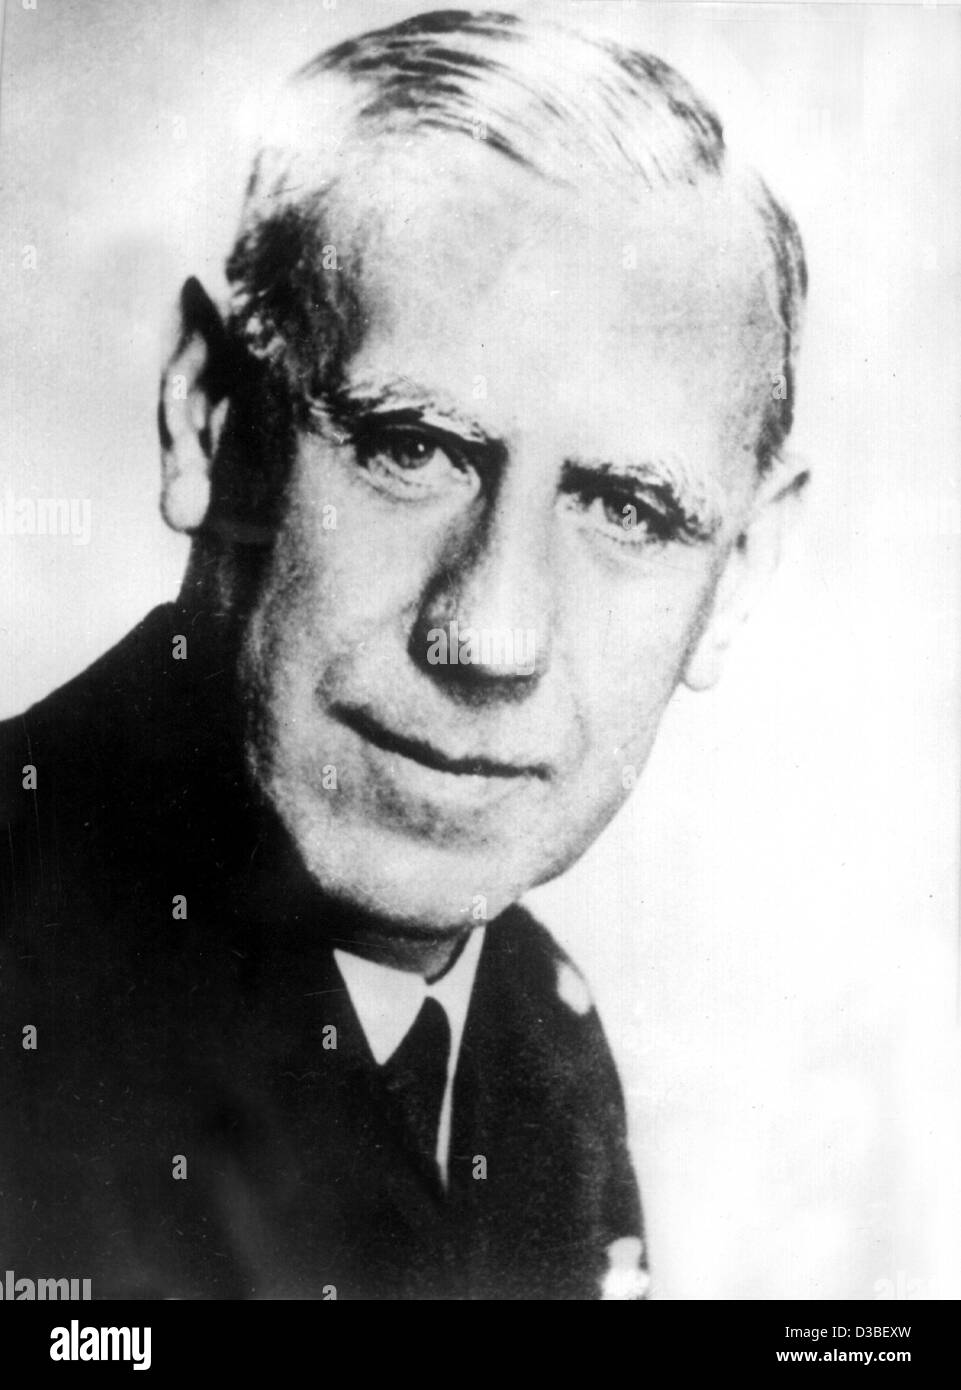 (dpa files) - Wilhelm Canaris, since 1935 Rear Admiral and from 1938 until 1944 head of the bureau for foreign affairs/defense, pictured on a contemporary photo. He actively supported the resistance movement against Adolf Hitler and was arrested after his failed assassination attempt on Hitler on 20 Stock Photo